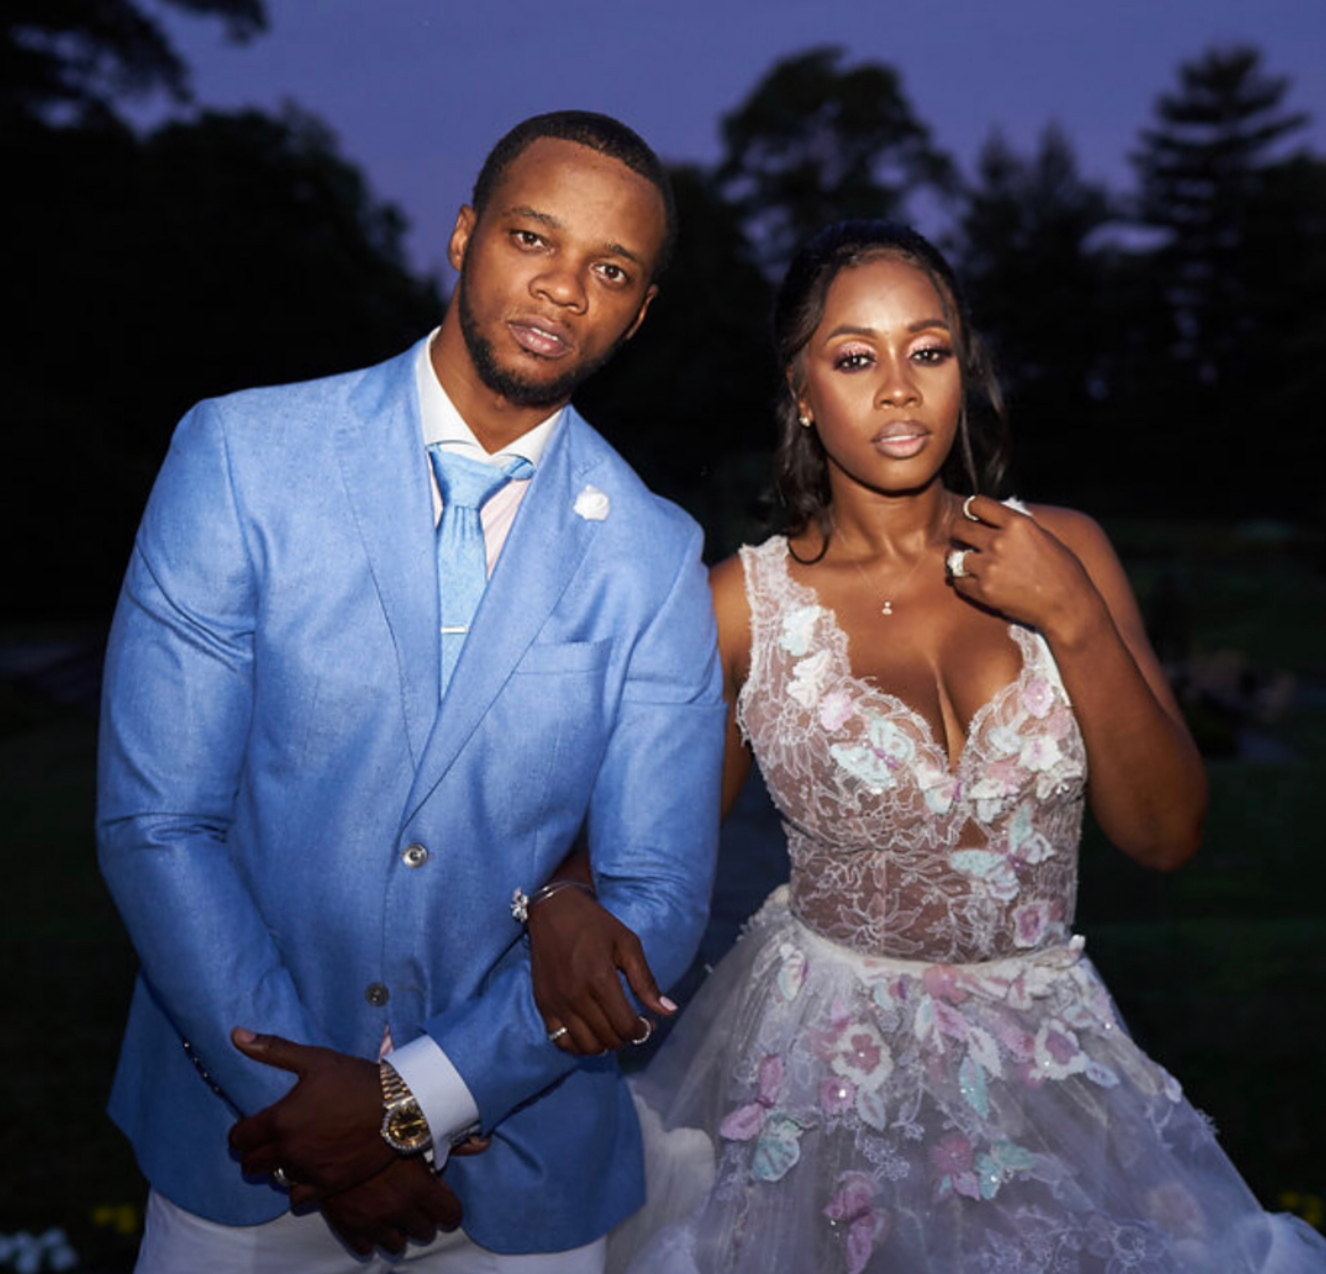 Remy Ma and Papoose Celebrated | 11-Year The In Dopest Their Essence Anniversary Possible Way